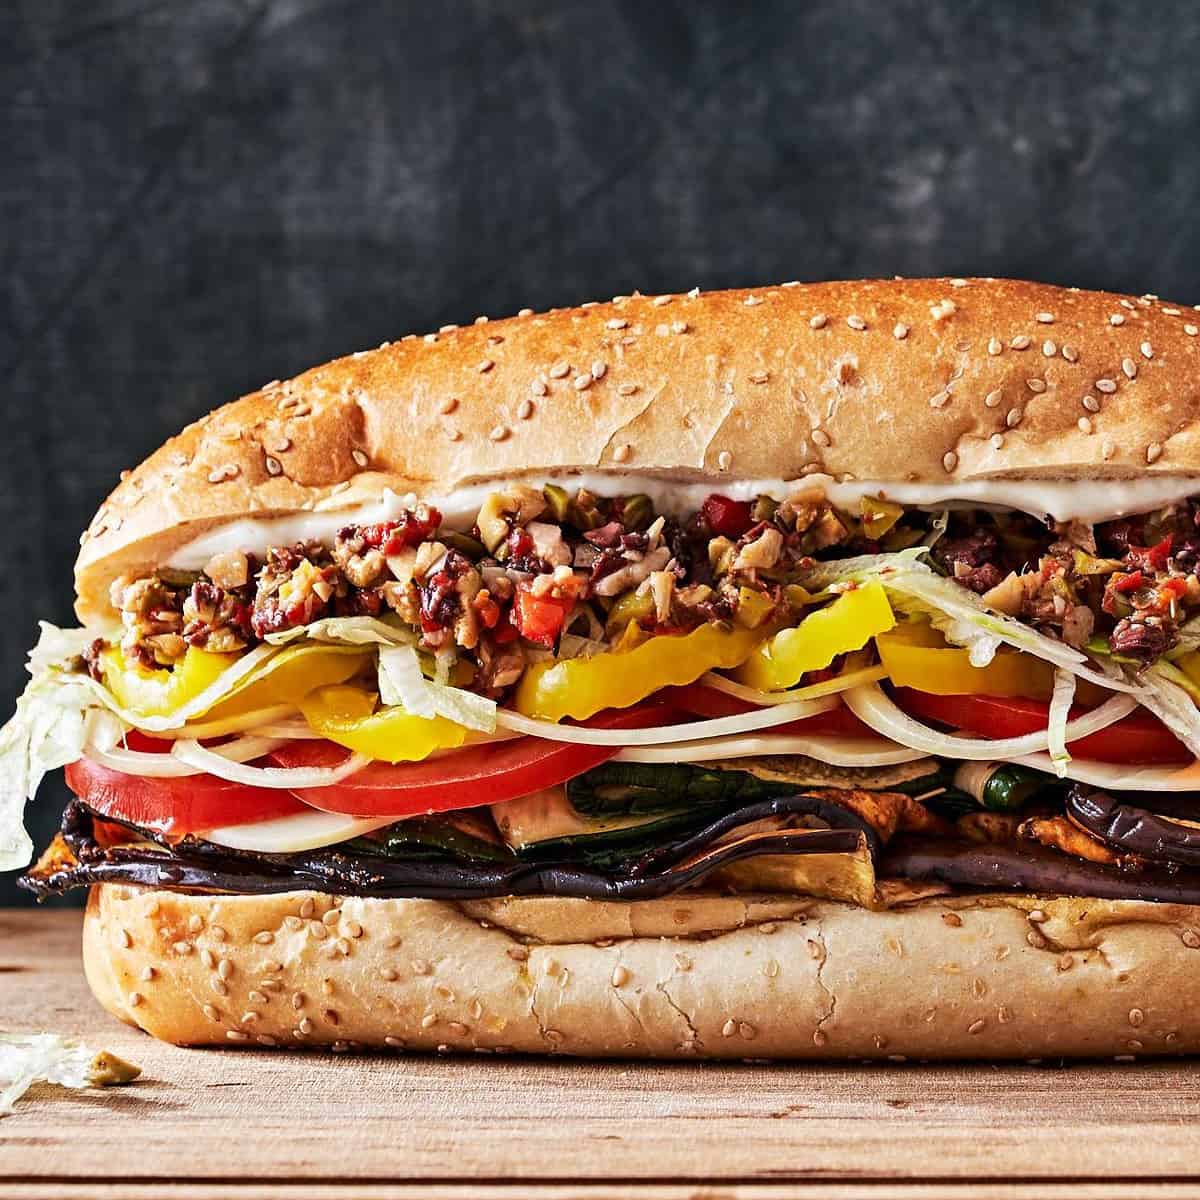  Say goodbye to boring sandwiches and hello to this tasty masterpiece.